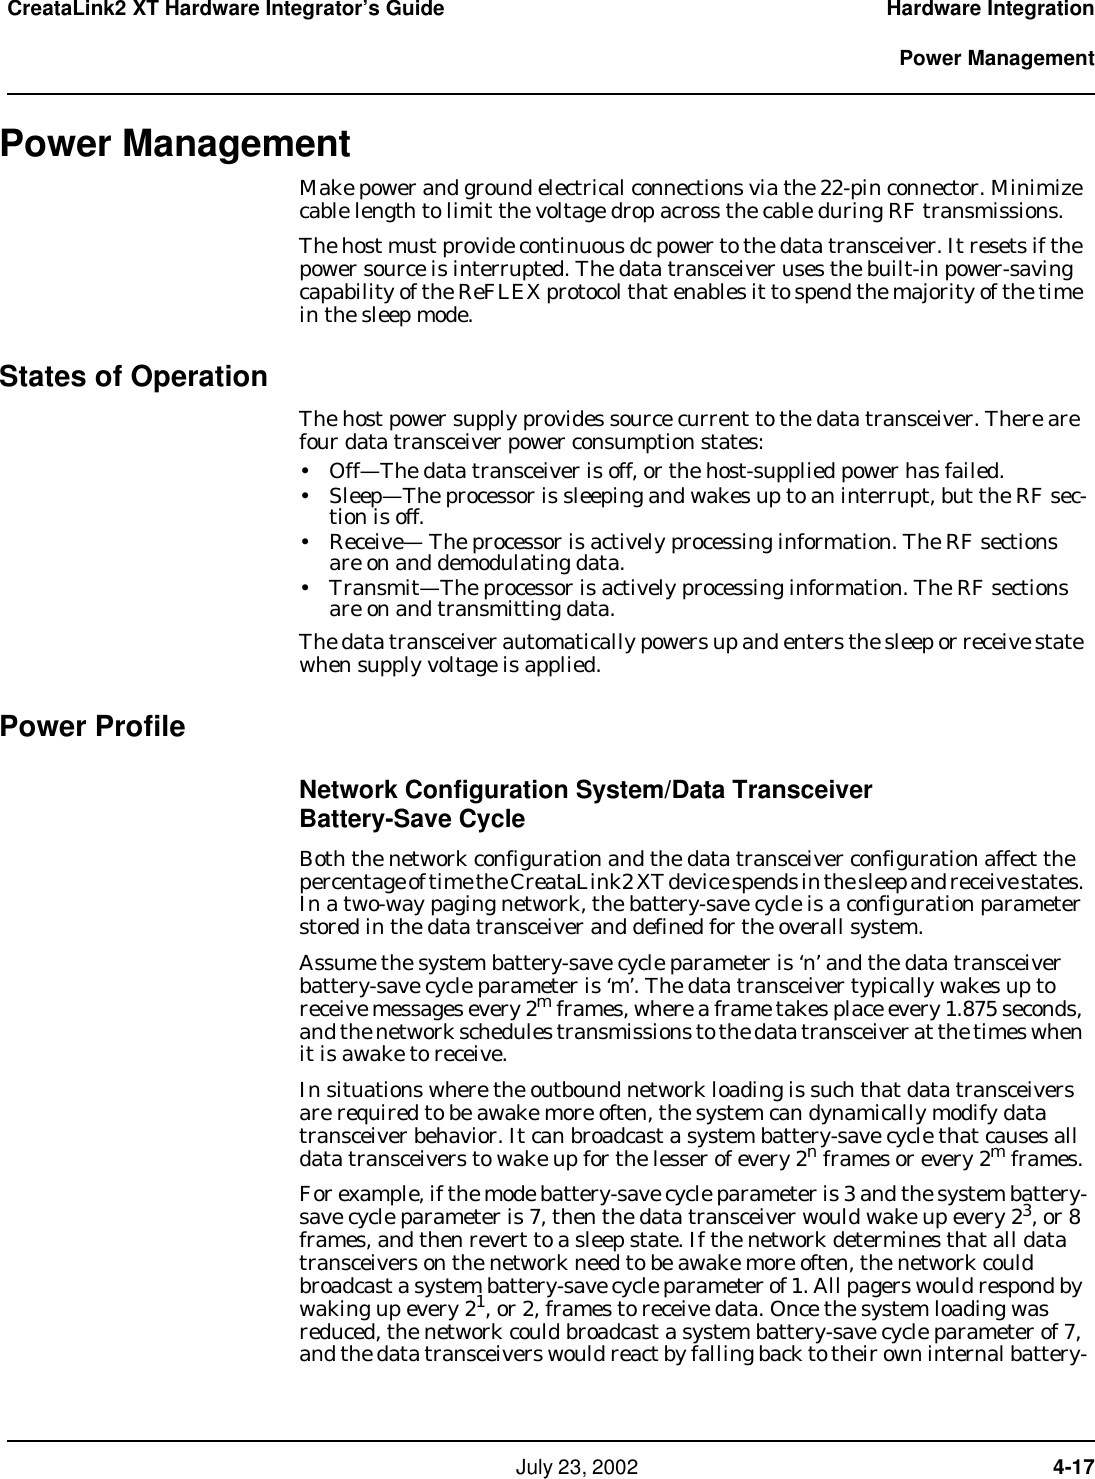     July 23, 2002  4-17CreataLink2 XT Hardware Integrator’s Guide Hardware Integration  Power ManagementPower ManagementMake power and ground electrical connections via the 22-pin connector. Minimize cable length to limit the voltage drop across the cable during RF transmissions.The host must provide continuous dc power to the data transceiver. It resets if the power source is interrupted. The data transceiver uses the built-in power-saving capability of the ReFLEX protocol that enables it to spend the majority of the time in the sleep mode. States of OperationThe host power supply provides source current to the data transceiver. There are four data transceiver power consumption states:• Off—The data transceiver is off, or the host-supplied power has failed.• Sleep—The processor is sleeping and wakes up to an interrupt, but the RF sec-tion is off.• Receive— The processor is actively processing information. The RF sections are on and demodulating data.• Transmit—The processor is actively processing information. The RF sections are on and transmitting data.The data transceiver automatically powers up and enters the sleep or receive state when supply voltage is applied.Power ProfileNetwork Configuration System/Data Transceiver  Battery-Save CycleBoth the network configuration and the data transceiver configuration affect the percentage of time the CreataLink2 XT device spends in the sleep and receive states. In a two-way paging network, the battery-save cycle is a configuration parameter stored in the data transceiver and defined for the overall system. Assume the system battery-save cycle parameter is ‘n’ and the data transceiver battery-save cycle parameter is ‘m’. The data transceiver typically wakes up to receive messages every 2m frames, where a frame takes place every 1.875 seconds, and the network schedules transmissions to the data transceiver at the times when it is awake to receive. In situations where the outbound network loading is such that data transceivers are required to be awake more often, the system can dynamically modify data transceiver behavior. It can broadcast a system battery-save cycle that causes all data transceivers to wake up for the lesser of every 2n frames or every 2m frames.For example, if the mode battery-save cycle parameter is 3 and the system battery-save cycle parameter is 7, then the data transceiver would wake up every 23, or 8 frames, and then revert to a sleep state. If the network determines that all data transceivers on the network need to be awake more often, the network could broadcast a system battery-save cycle parameter of 1. All pagers would respond by waking up every 21, or 2, frames to receive data. Once the system loading was reduced, the network could broadcast a system battery-save cycle parameter of 7, and the data transceivers would react by falling back to their own internal battery-